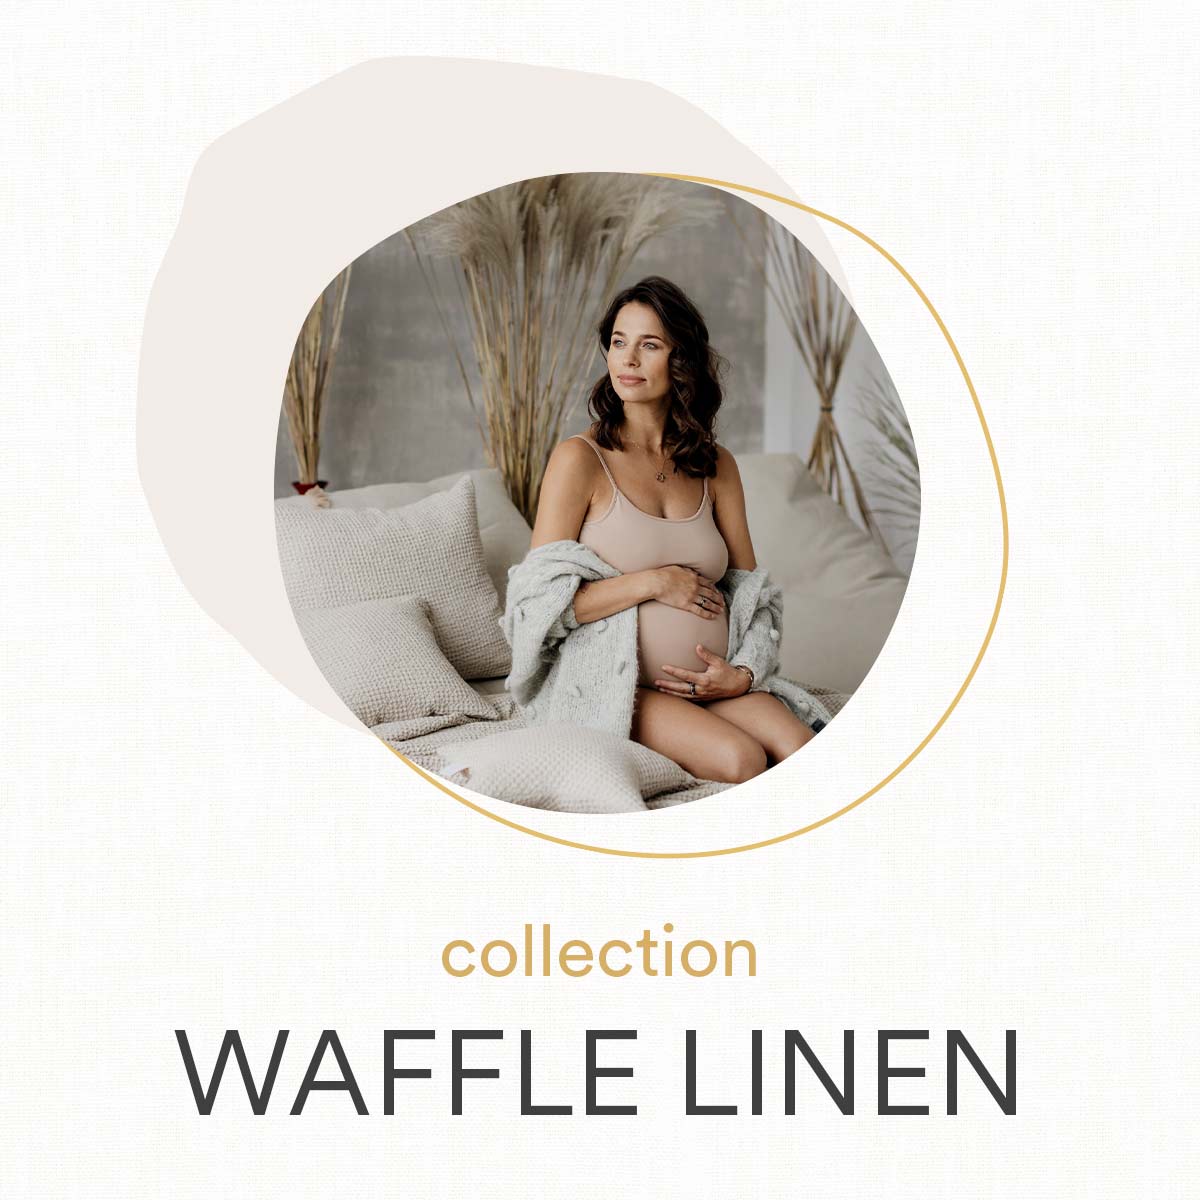 Waffle linen collection